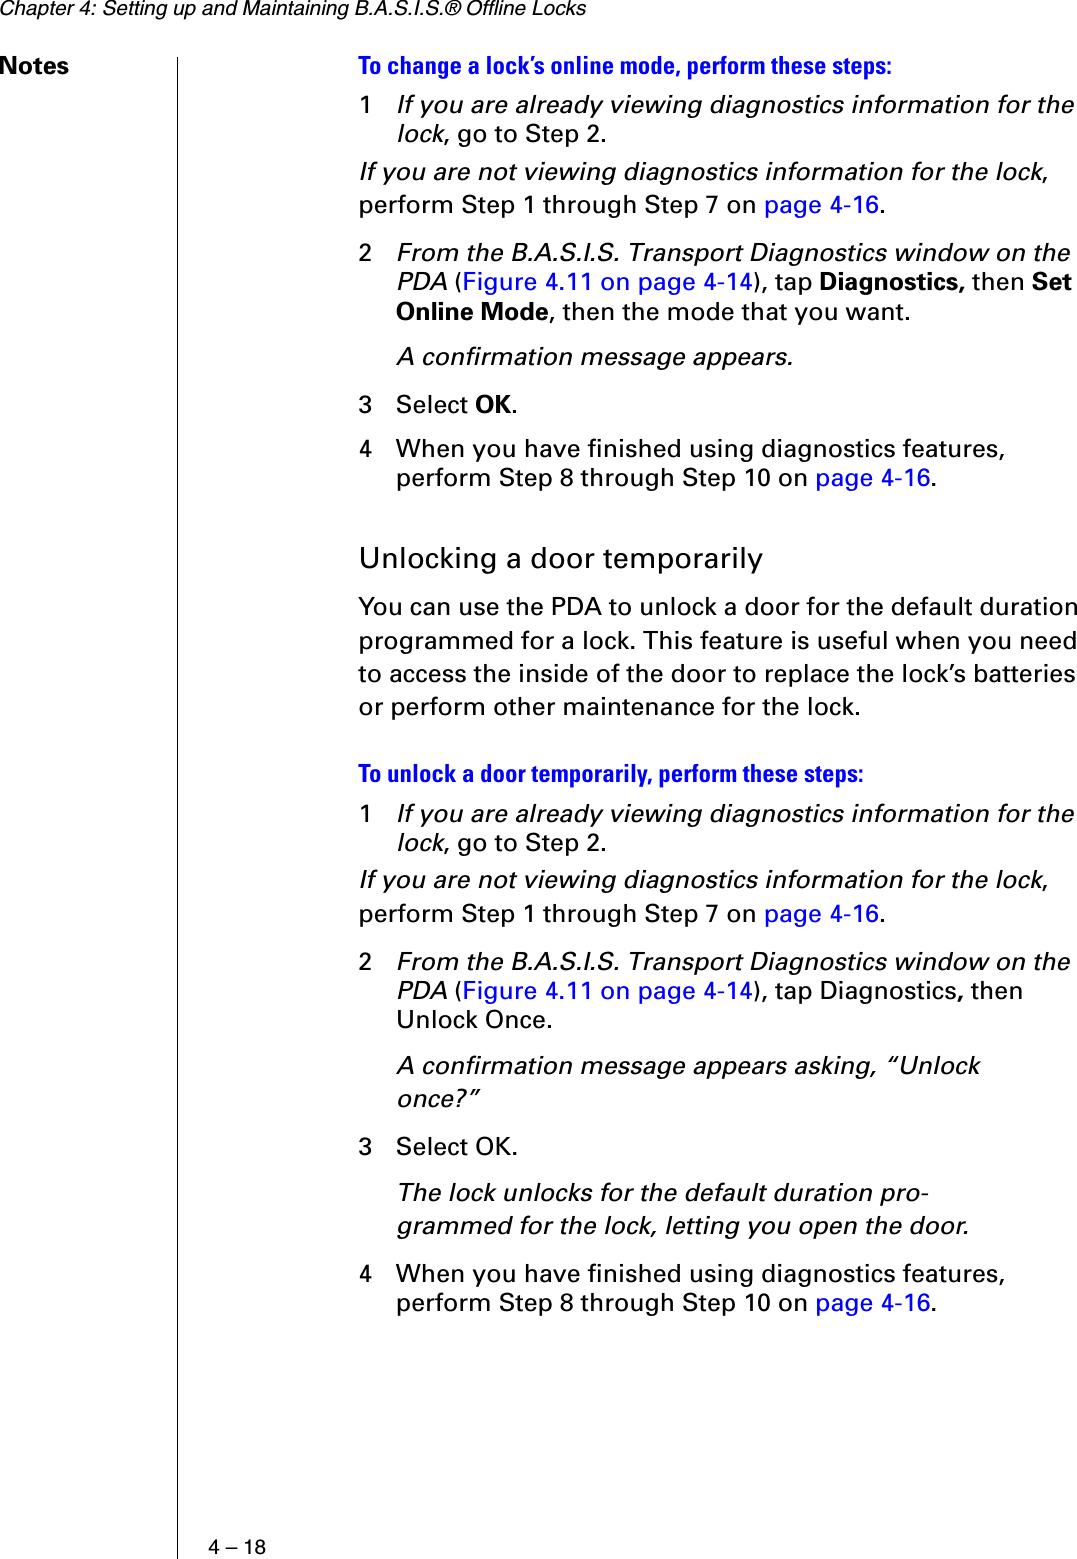 Chapter 4: Setting up and Maintaining B.A.S.I.S.® Offline Locks4 – 18Notes To change a lock’s online mode, perform these steps:1If you are already viewing diagnostics information for the lock, go to Step 2.If you are not viewing diagnostics information for the lock, perform Step 1 through Step 7 on page 4-16.2From the B.A.S.I.S. Transport Diagnostics window on the PDA (Figure 4.11 on page 4-14), tap Diagnostics, then Set Online Mode, then the mode that you want.A confirmation message appears.3 Select OK.4 When you have finished using diagnostics features, perform Step 8 through Step 10 on page 4-16.Unlocking a door temporarilyYou can use the PDA to unlock a door for the default duration programmed for a lock. This feature is useful when you need to access the inside of the door to replace the lock’s batteries or perform other maintenance for the lock.To unlock a door temporarily, perform these steps:1If you are already viewing diagnostics information for the lock, go to Step 2.If you are not viewing diagnostics information for the lock, perform Step 1 through Step 7 on page 4-16.2From the B.A.S.I.S. Transport Diagnostics window on the PDA (Figure 4.11 on page 4-14), tap Diagnostics, then Unlock Once.A confirmation message appears asking, “Unlock once?”3 Select OK.The lock unlocks for the default duration pro-grammed for the lock, letting you open the door.4 When you have finished using diagnostics features, perform Step 8 through Step 10 on page 4-16.